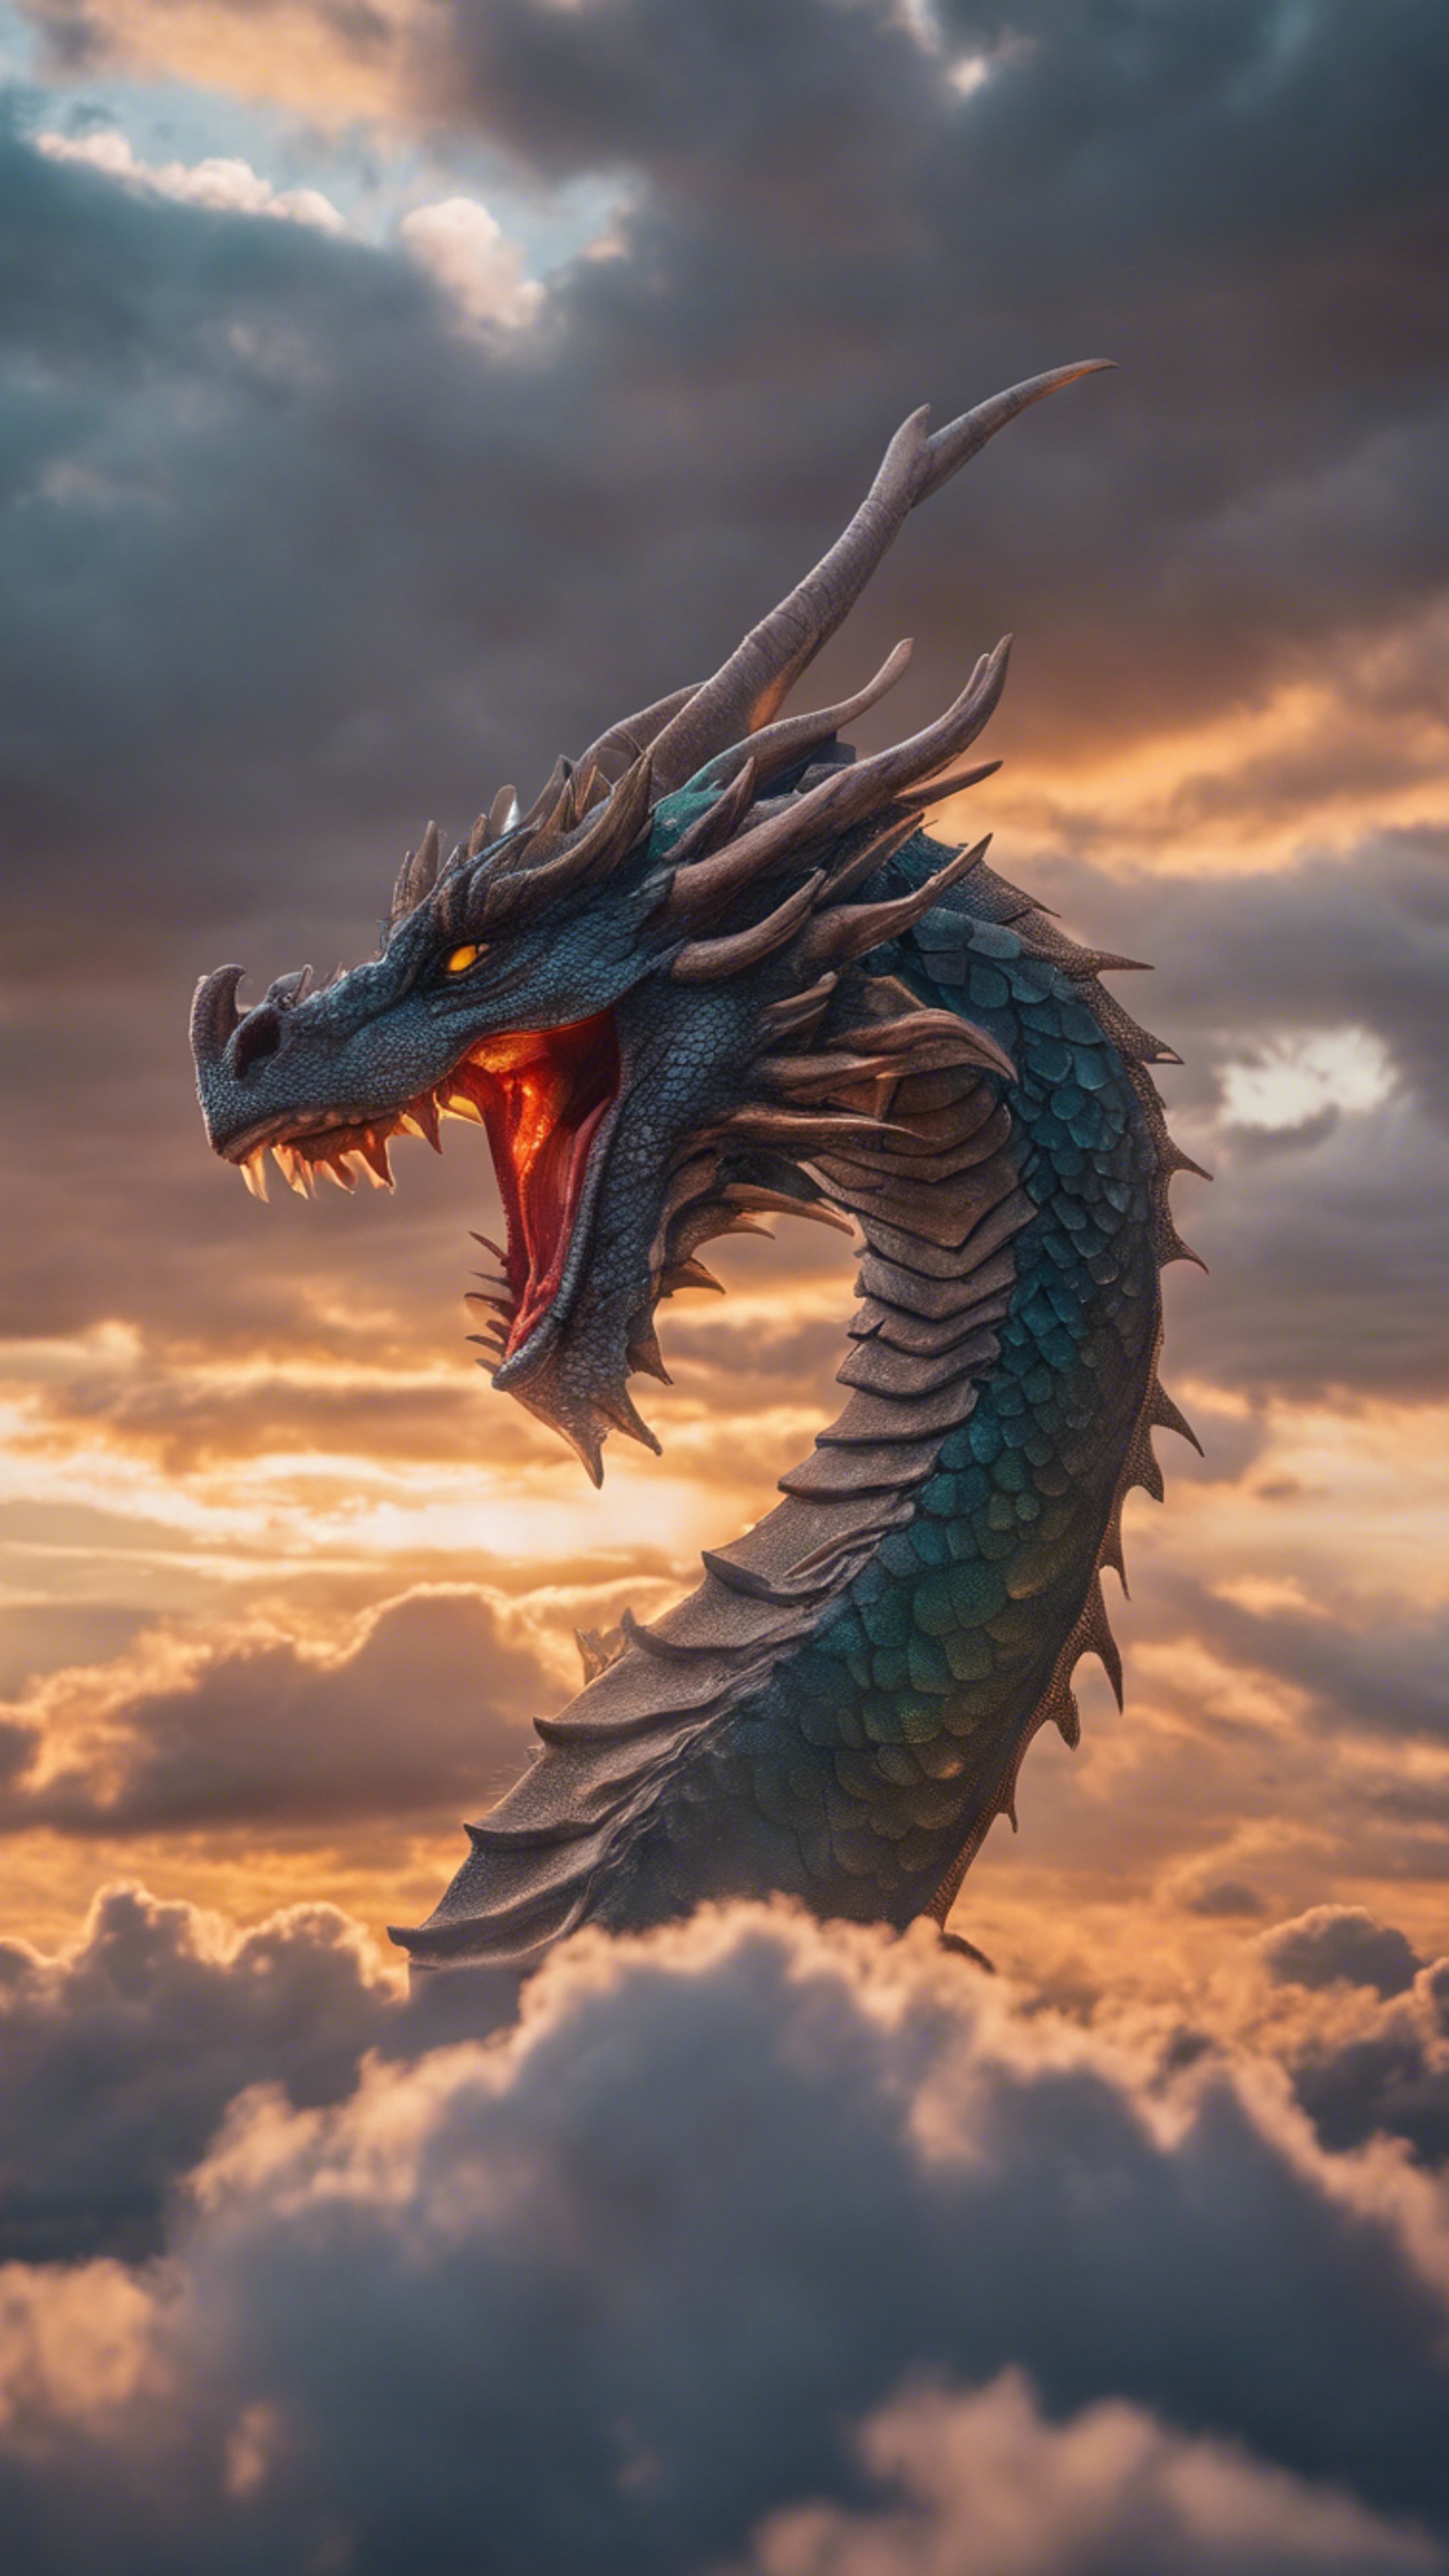 A dragon of pure light breaking through the clouds as the sun sets, its scales reflecting the vibrant colors of dusk. Tapetai[43b0d43f7e0c44e88acd]